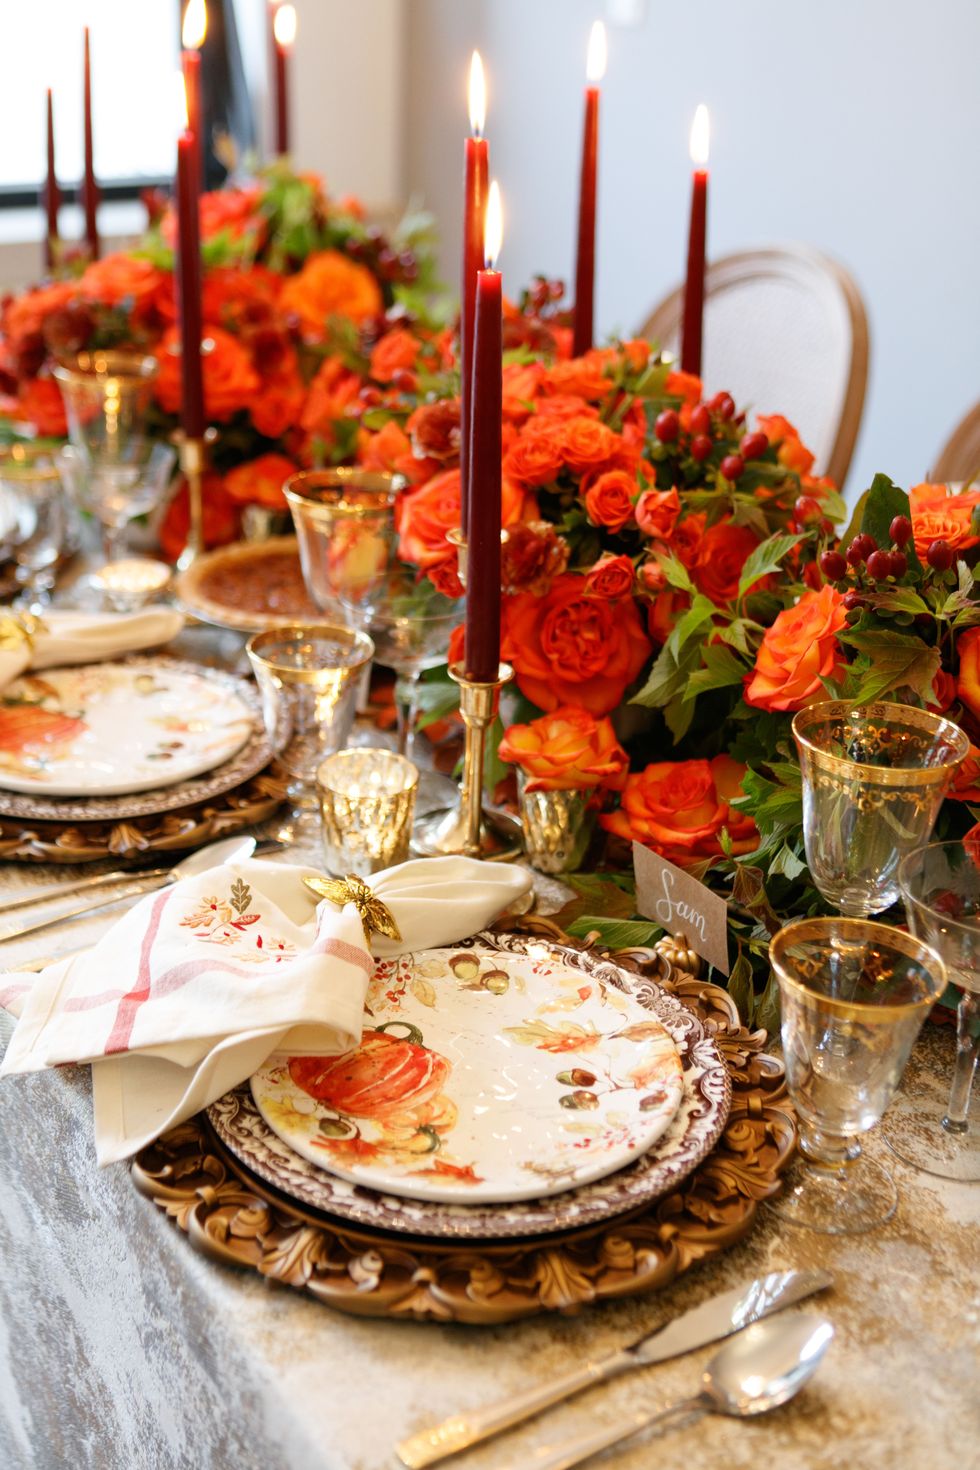 60 Thanksgiving Centerpieces That Will Make the Turkey Jealous